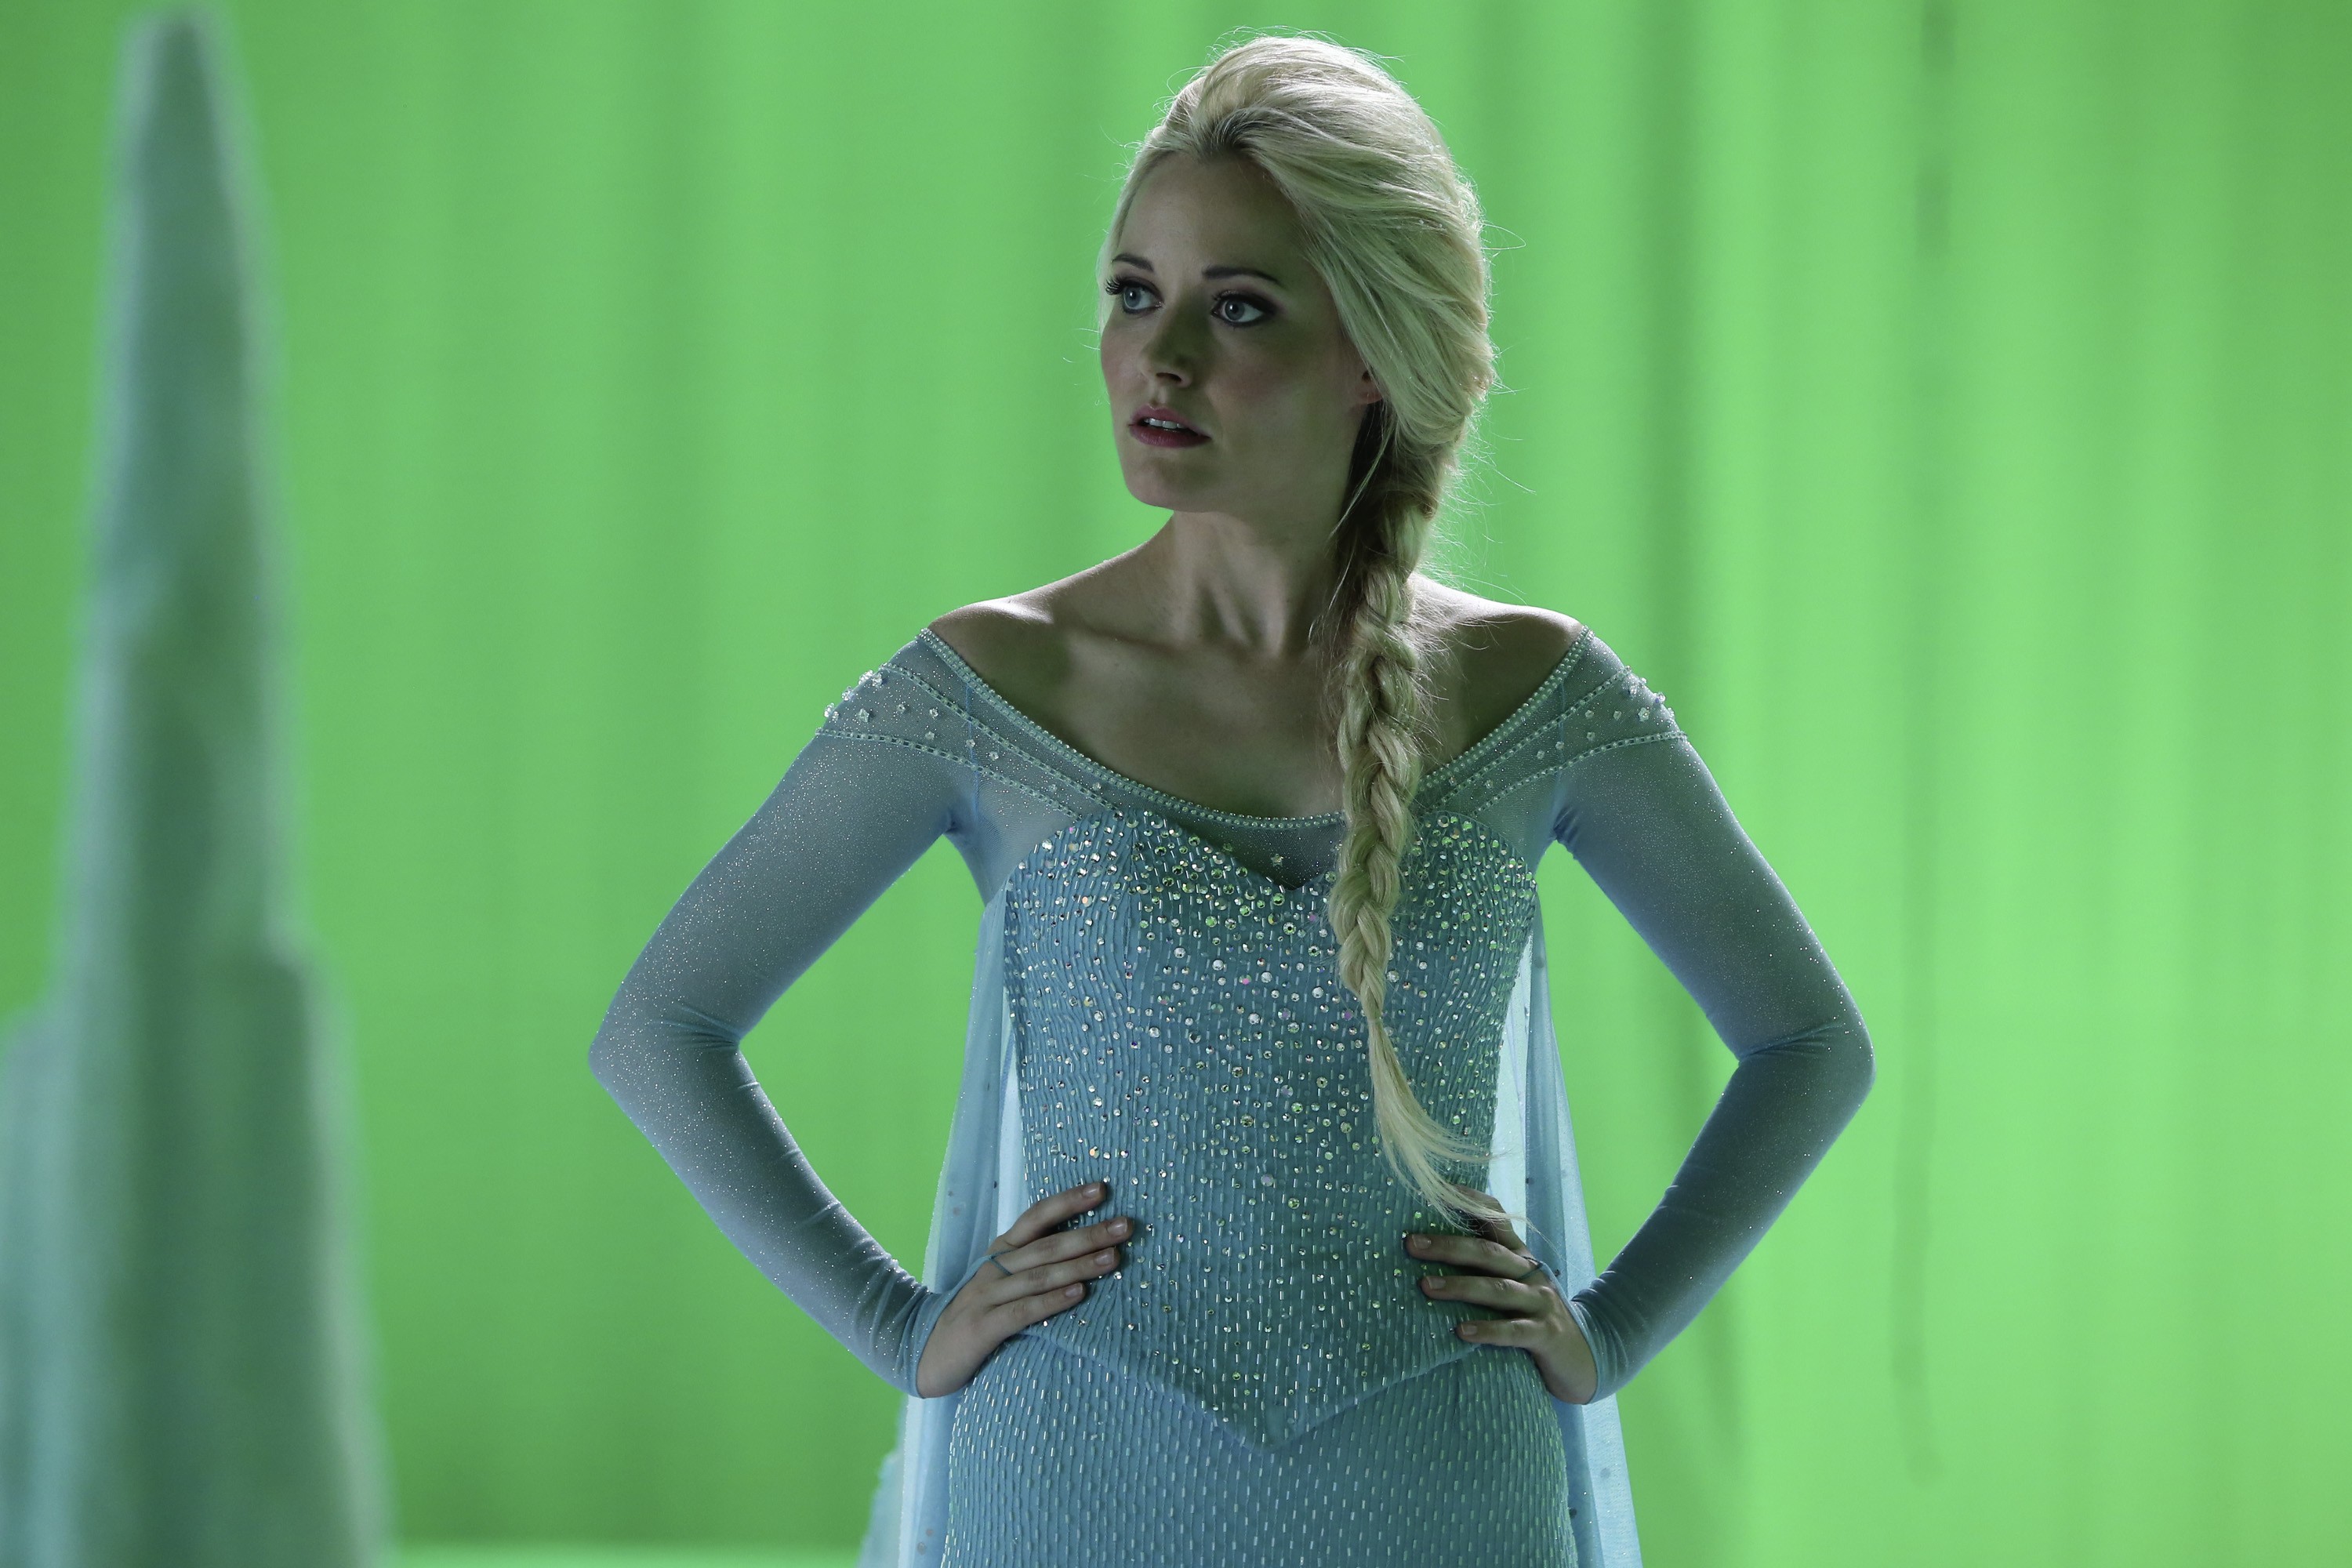 Georgina Haig Once Upon A Time Princess Elsa Hands On Hips Blonde Braids Looking Into The Distance W 3000x2000